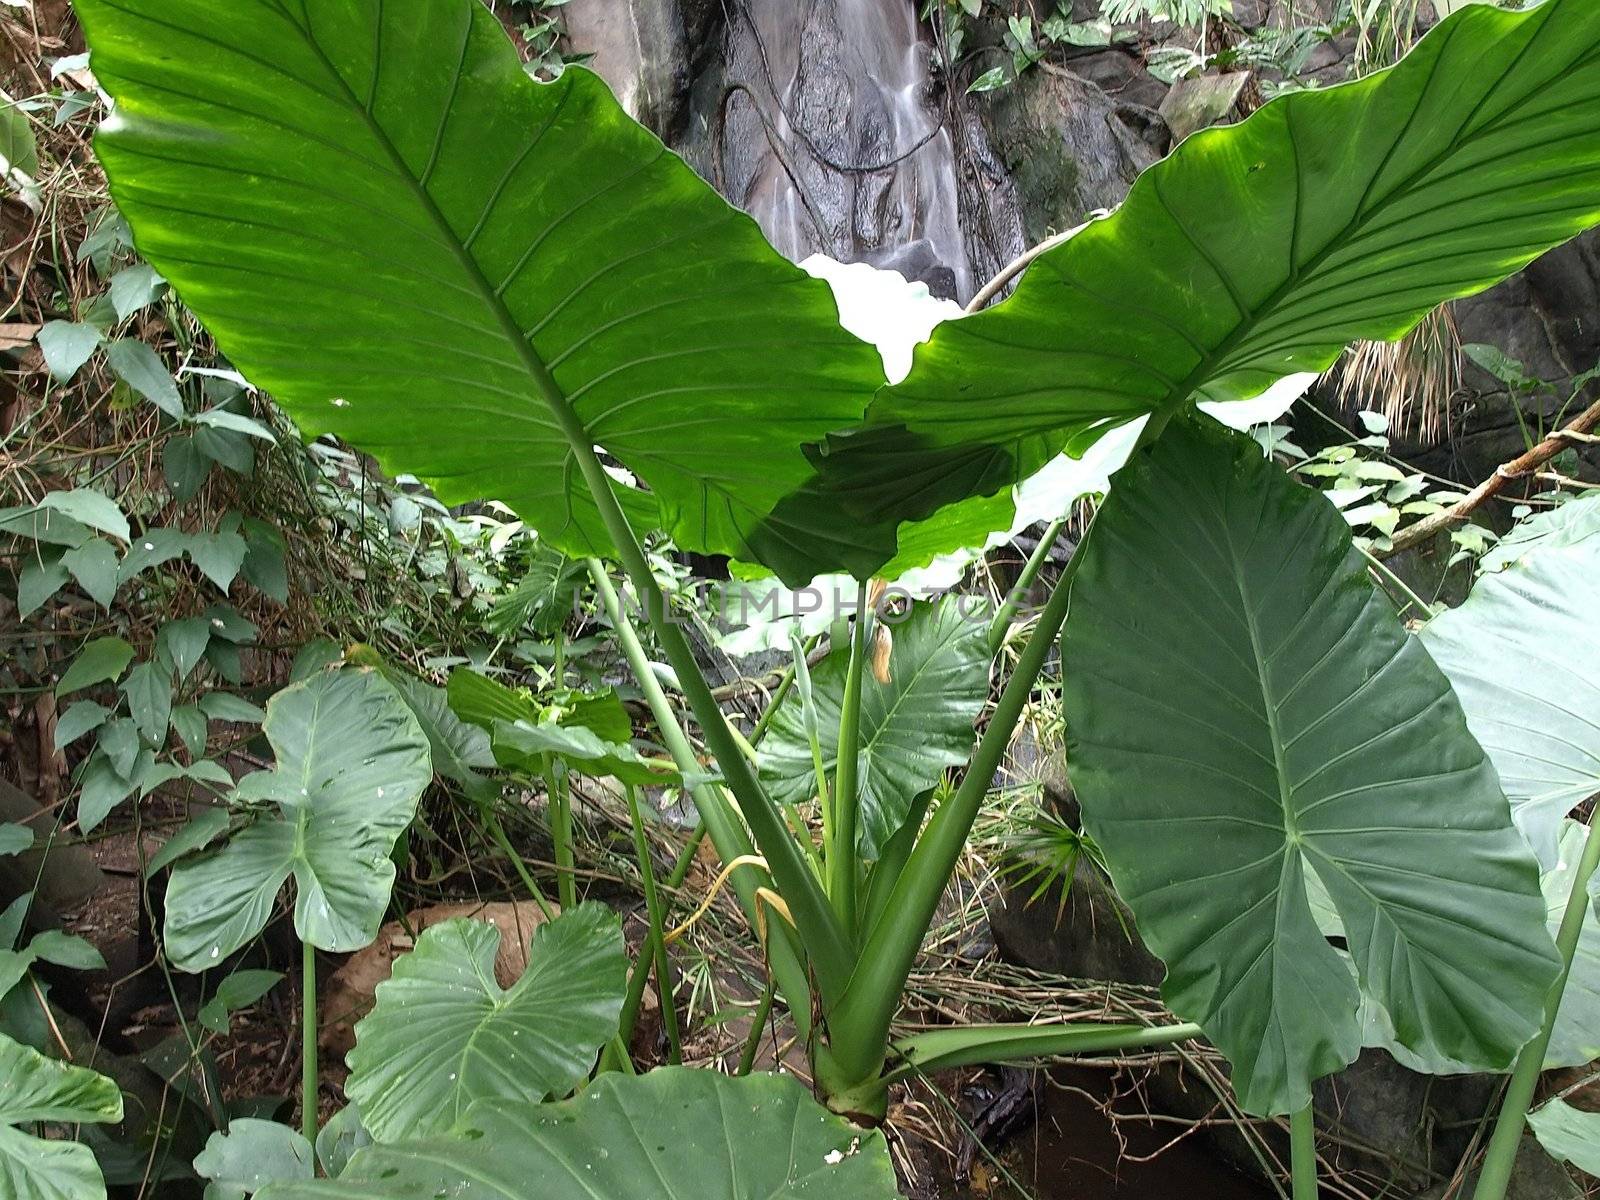 Colocasia or elephant ear by Ric510